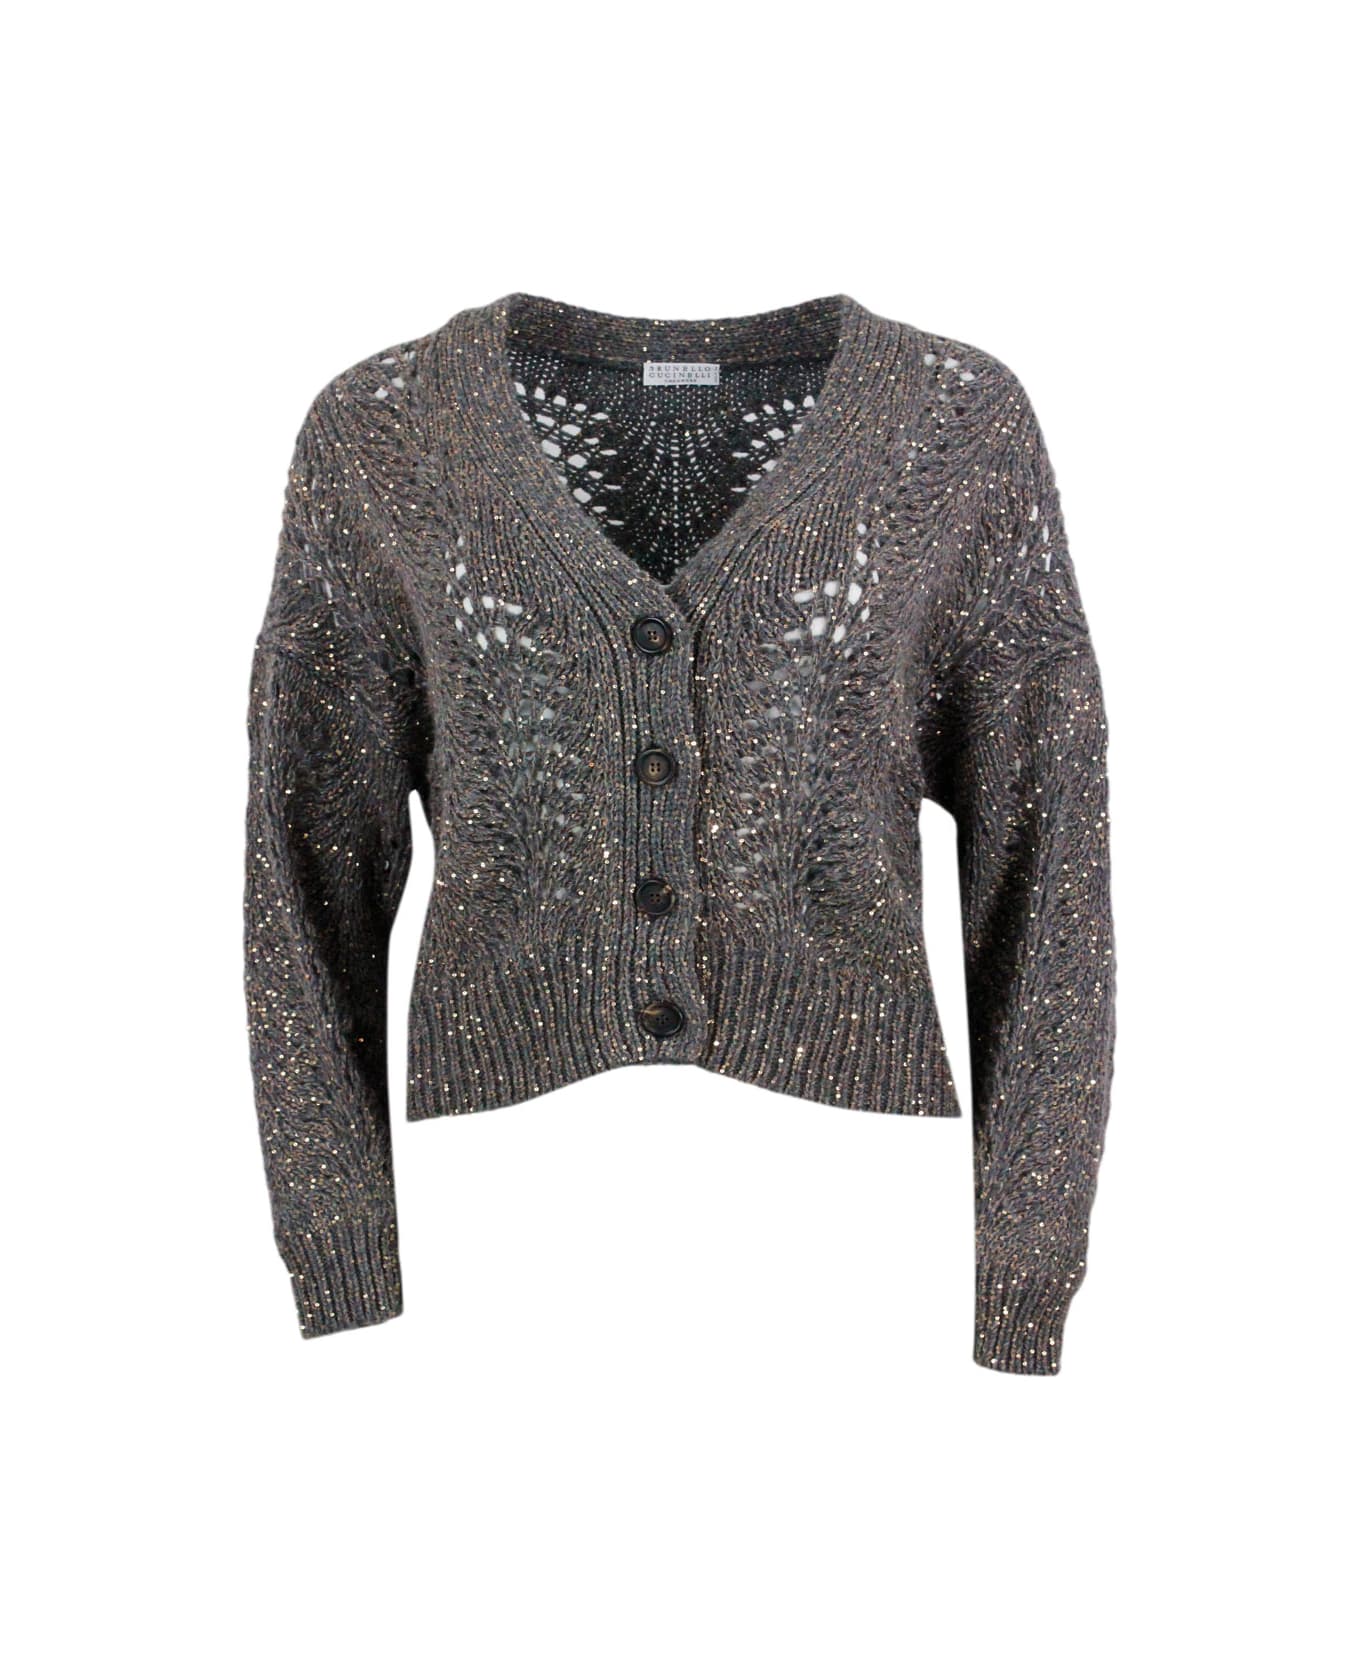 Brunello Cucinelli Cardigan Sweater With Buttons In Precious And Refined Feather Cashmere Embellished With A Dazzling Yarn With Sequins For A Shiny And Three-dimensional - Grey カーディガン